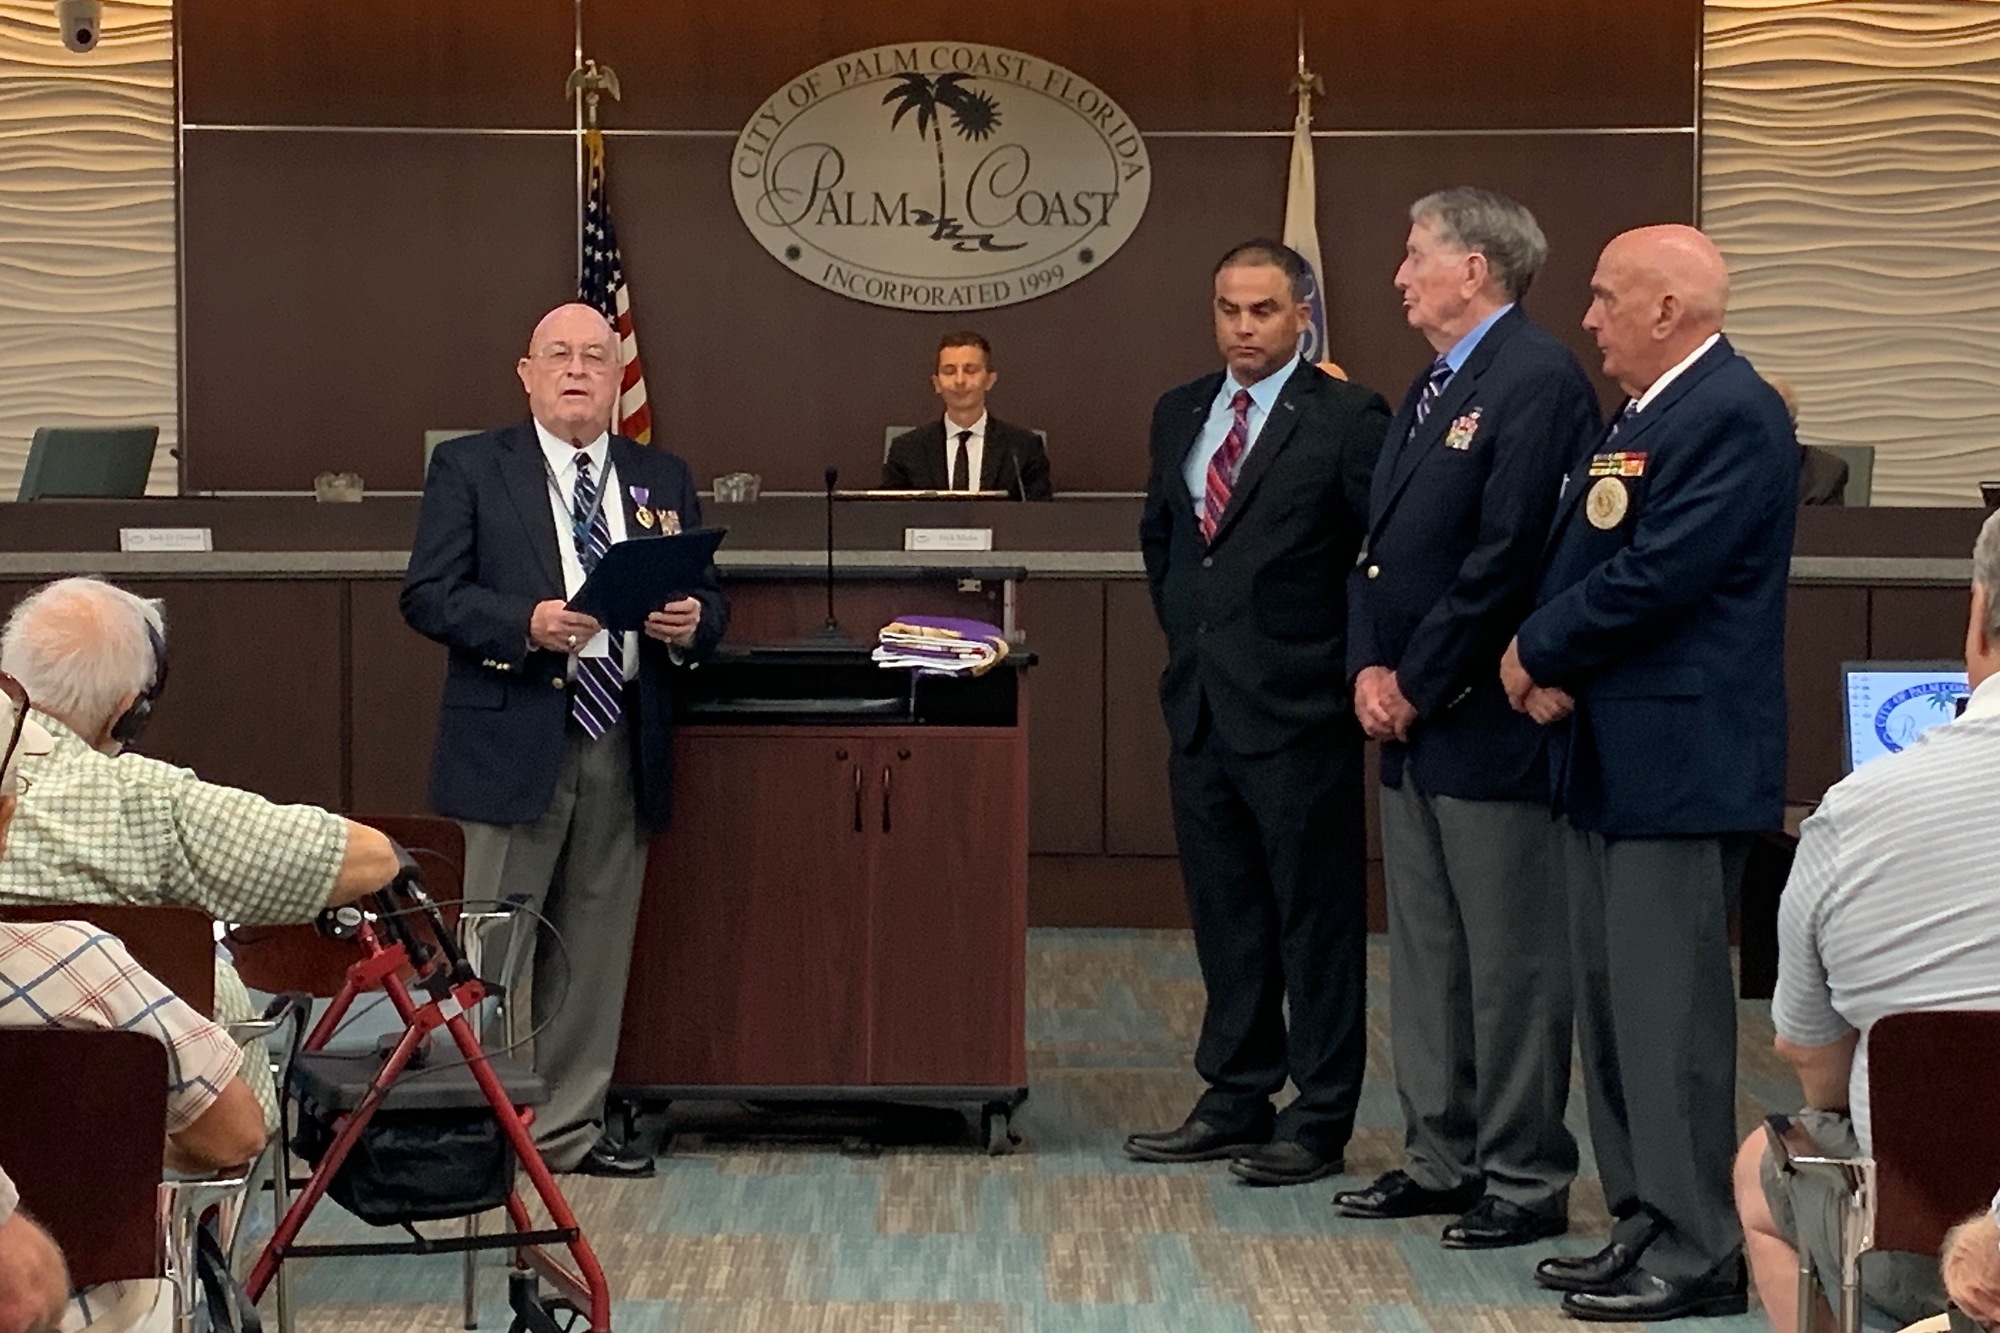 City Councilman Jack Howell, commandant of the Palm Coast chapter of the Military Order of the Purple Heart, reads the proclamation Aug. 6 (Photo by Jonathan Simmons)